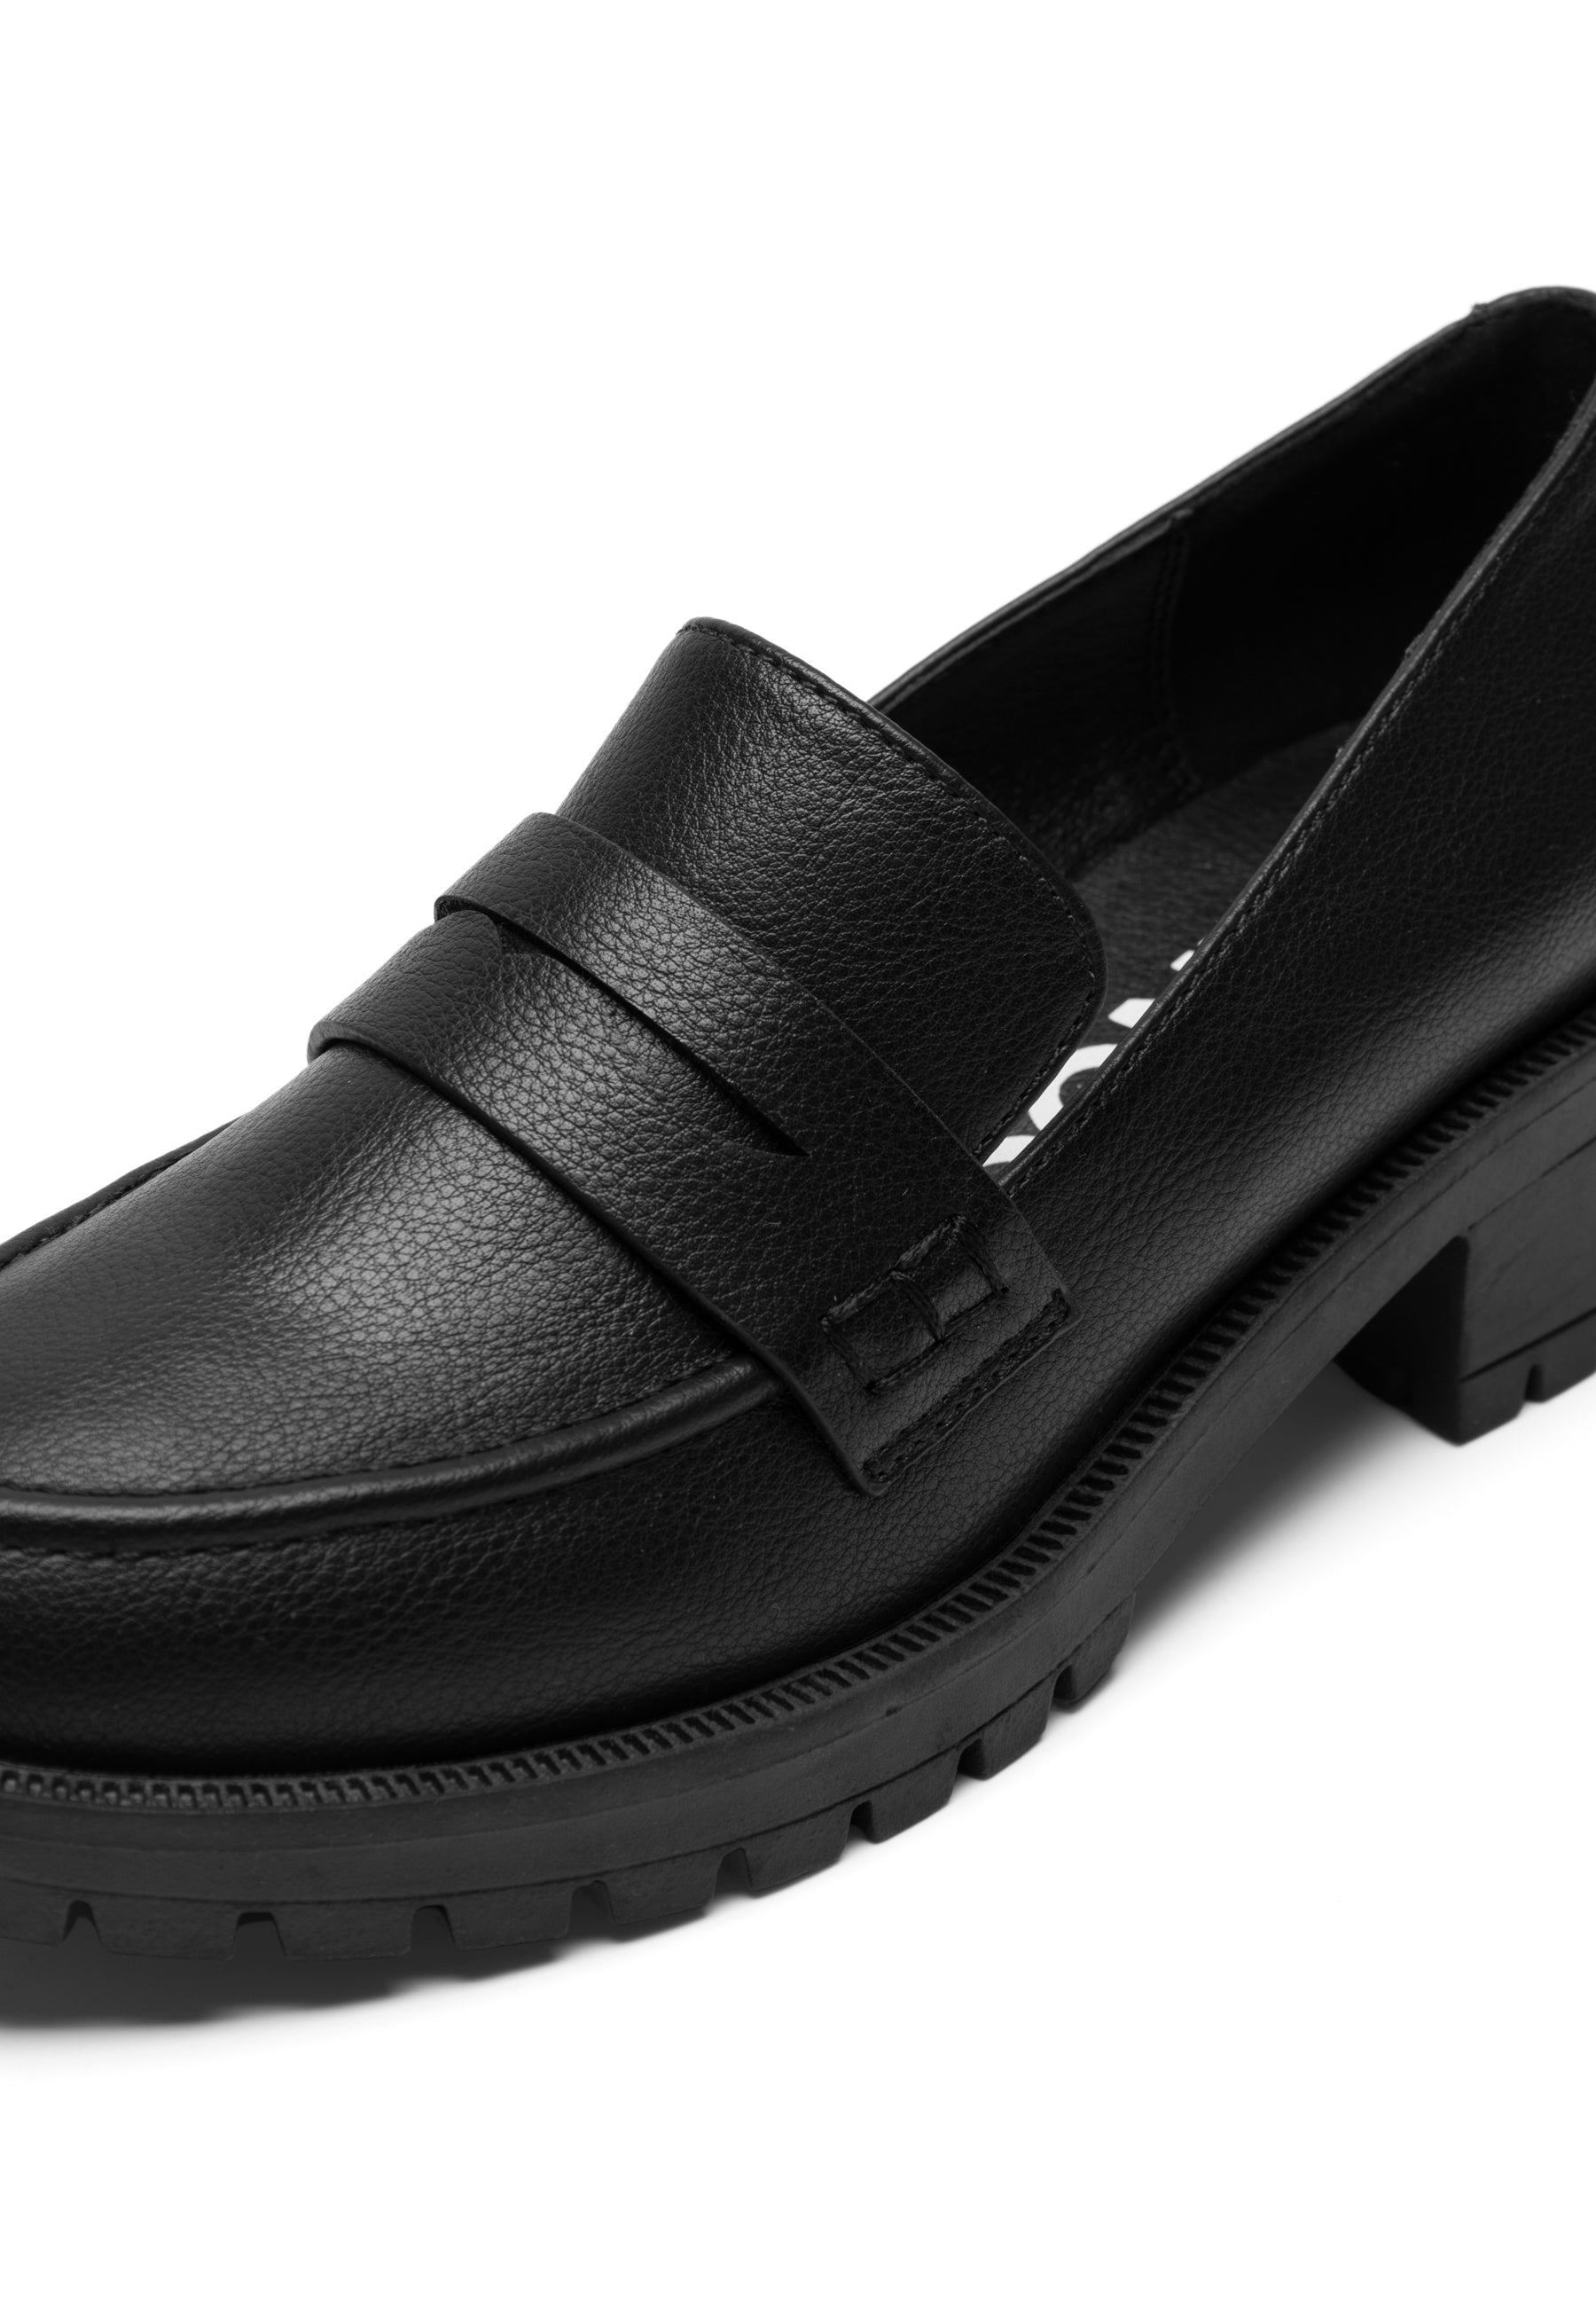 Bianco BIAPEARL Simple Penny Loafer Carnation Penny Loafer Black